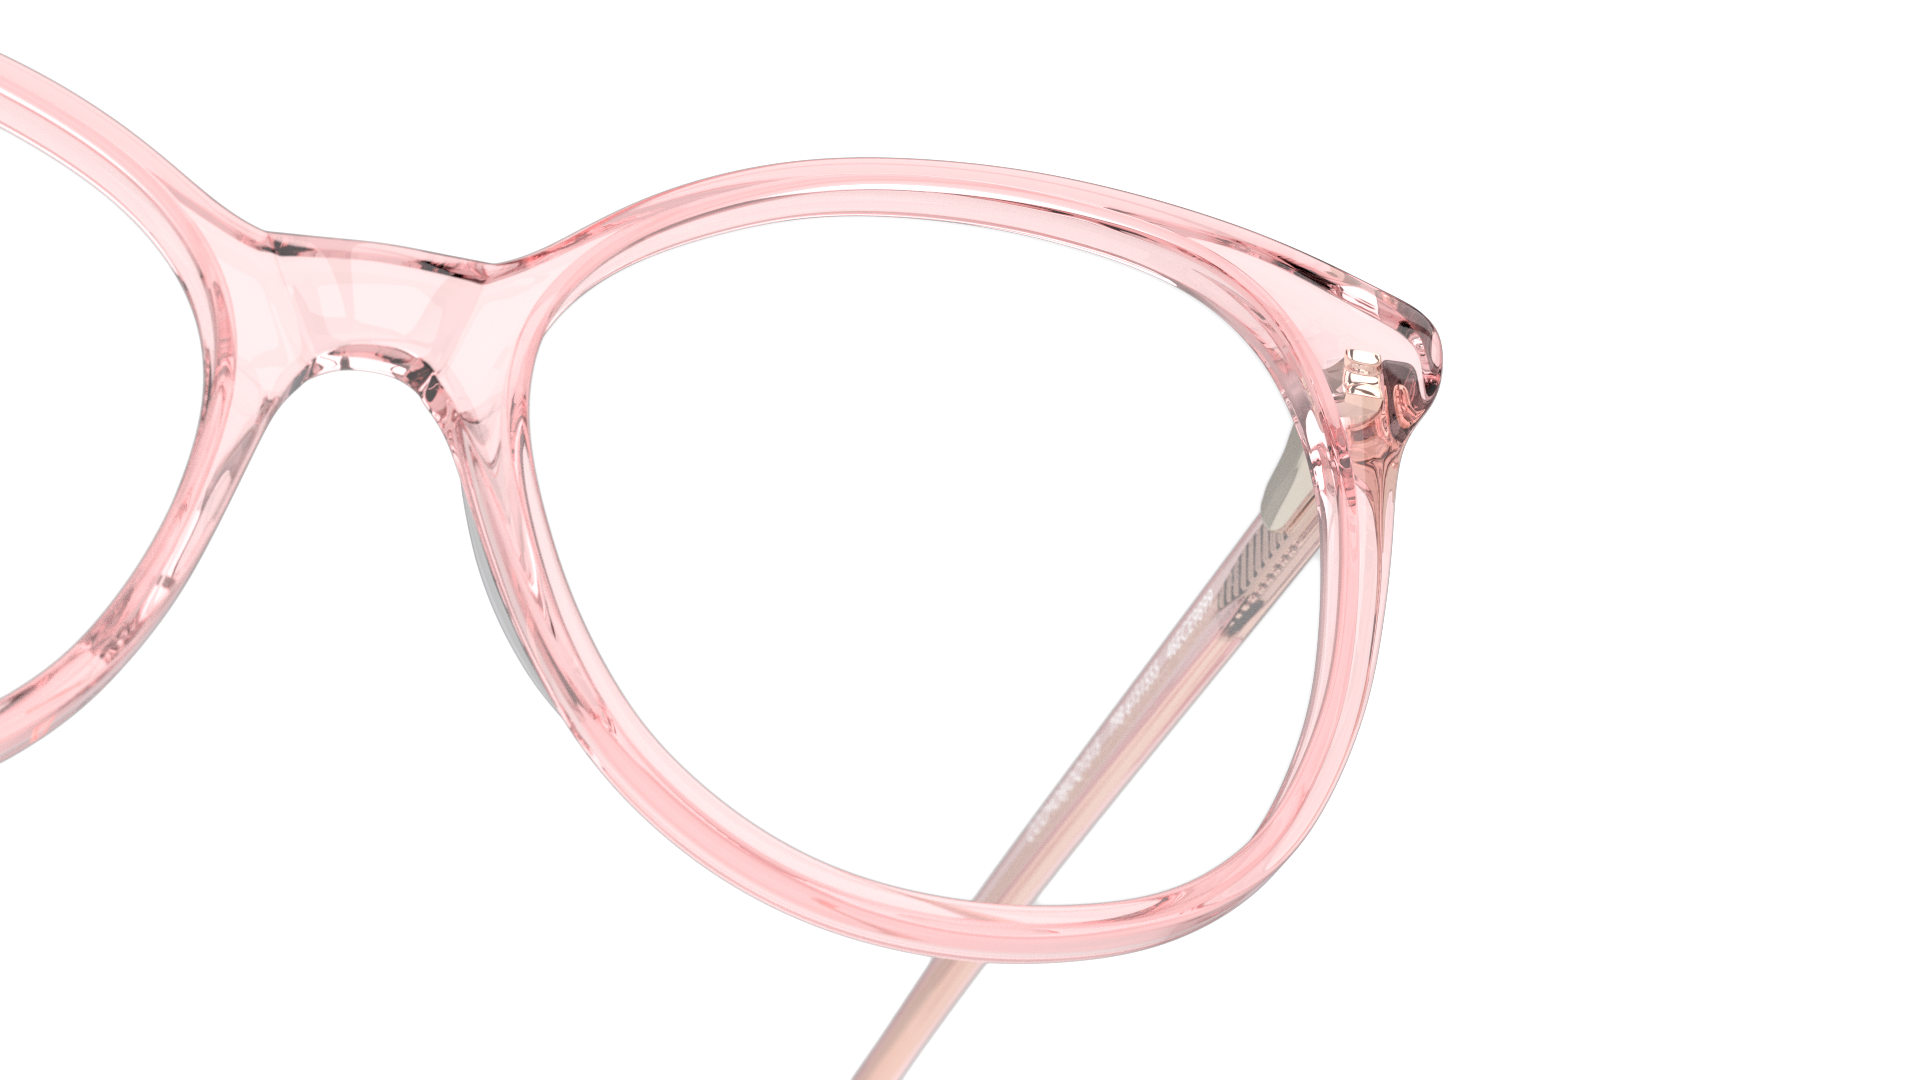 Detail01 Unofficial UNOF0002 (PX00) Glasses Transparent / Pink